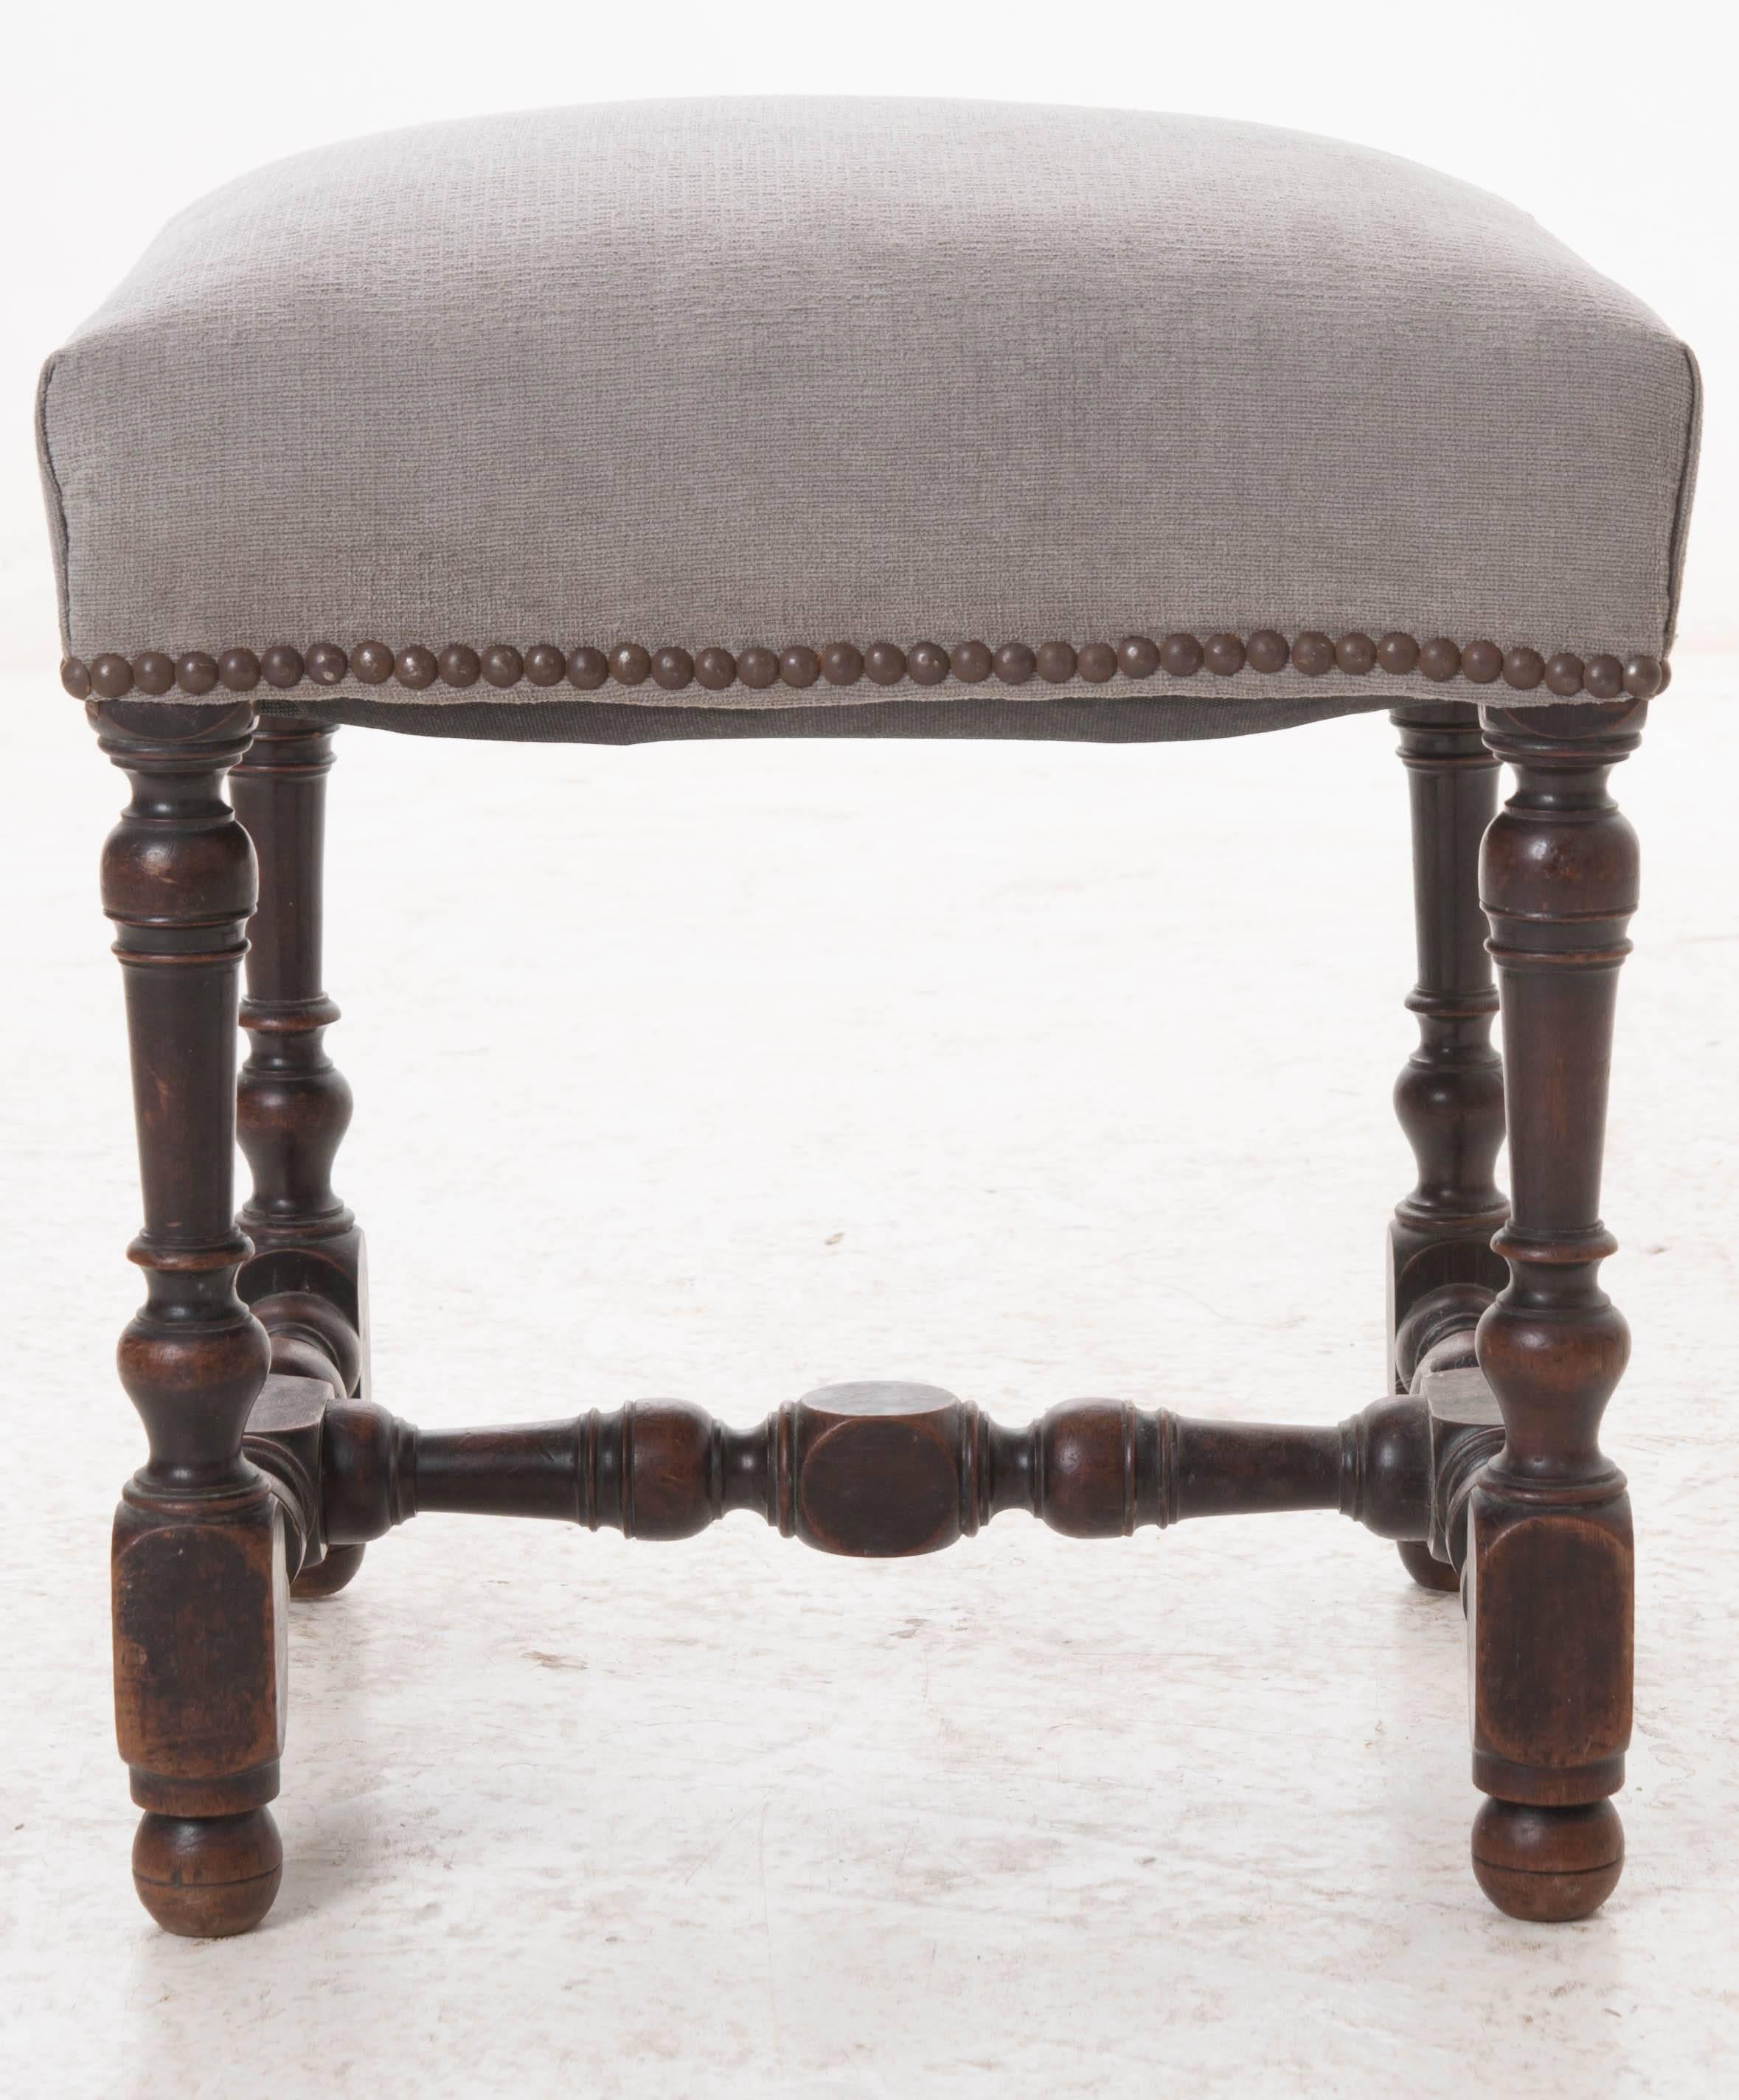 A charming, newly upholstered stool with nailhead trim from 19th century, France. Marvelously turned mahogany legs are joined by an equally marvelous turned stretcher. A perfect little place to rest your feet at the end of a long day!